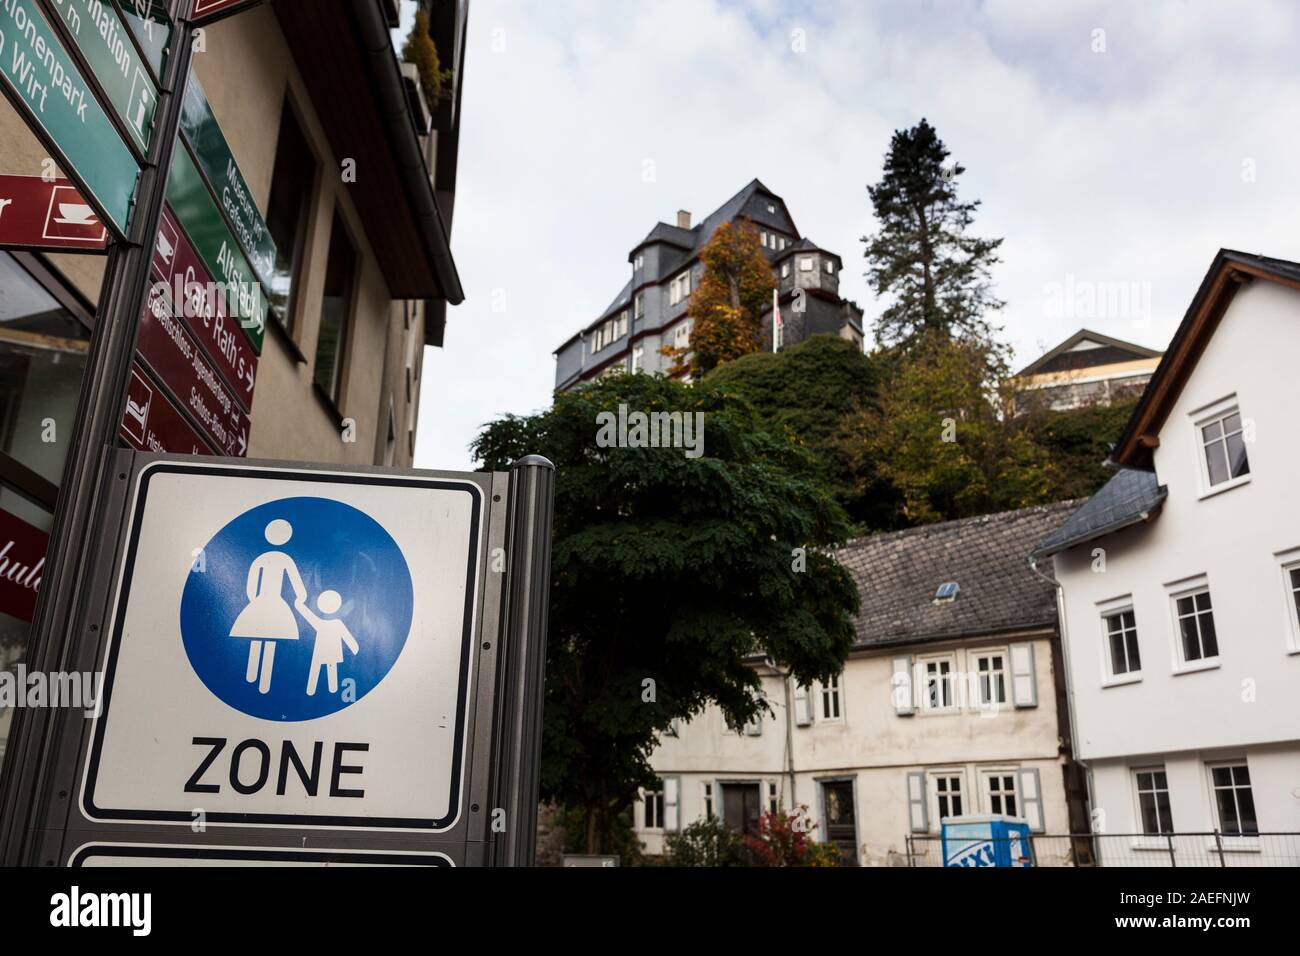 Signs and signposts in the old town of Diez Stock Photo